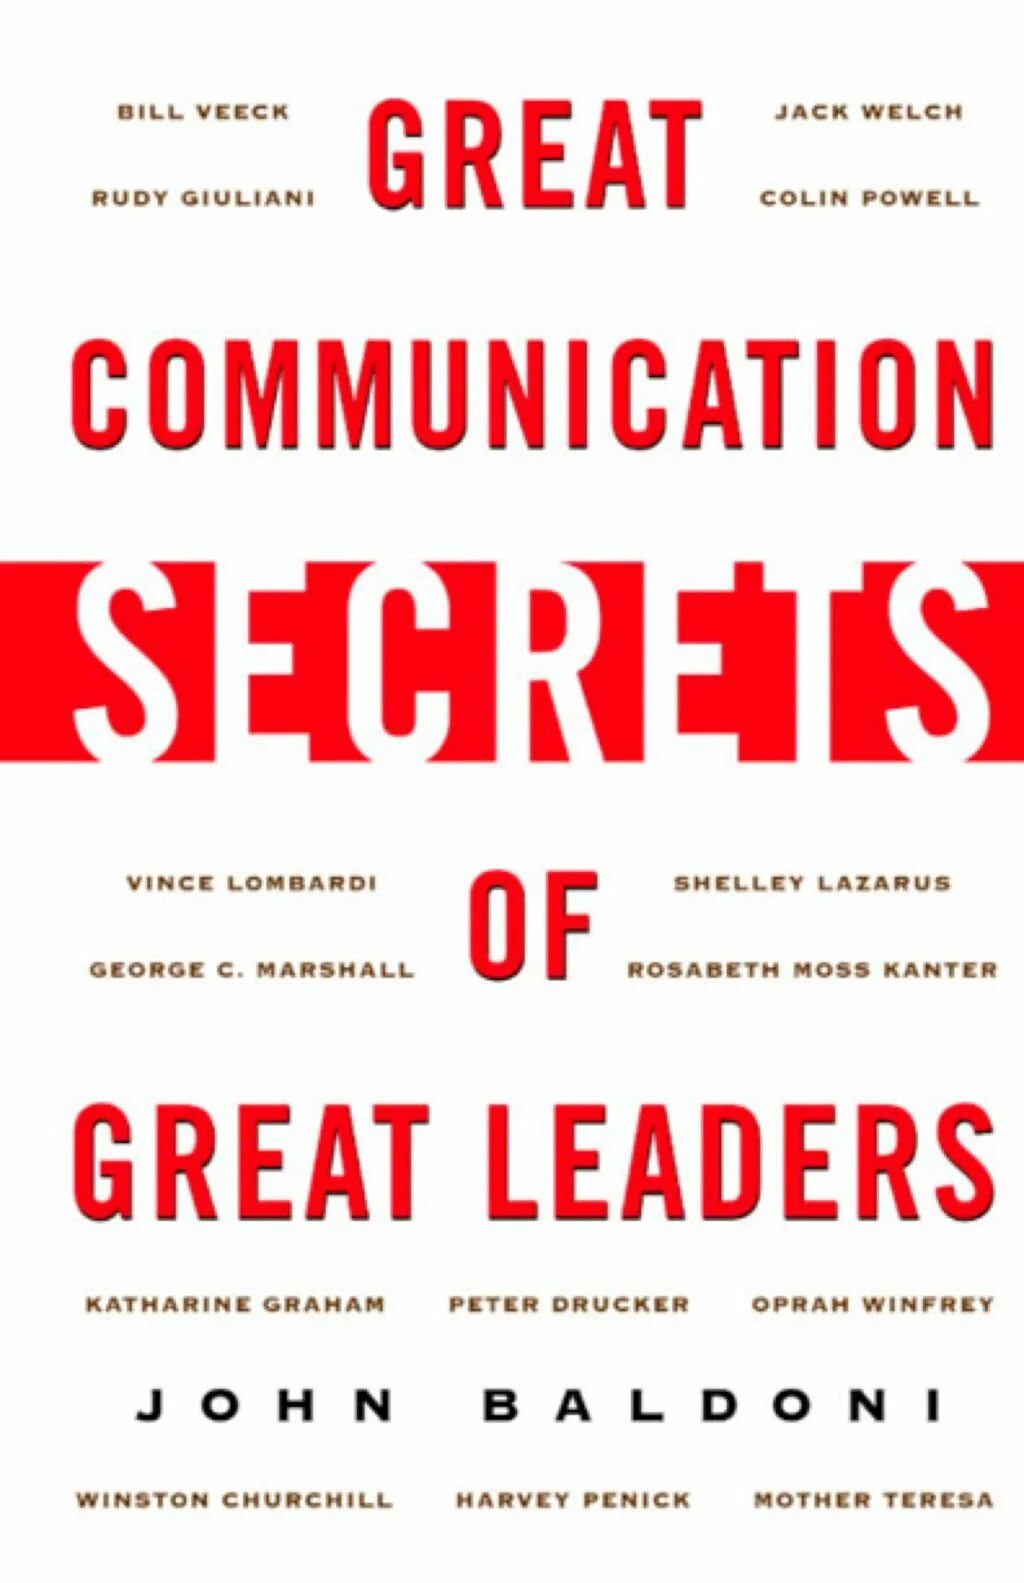 Great leader. Good to great pdf. The great communicator